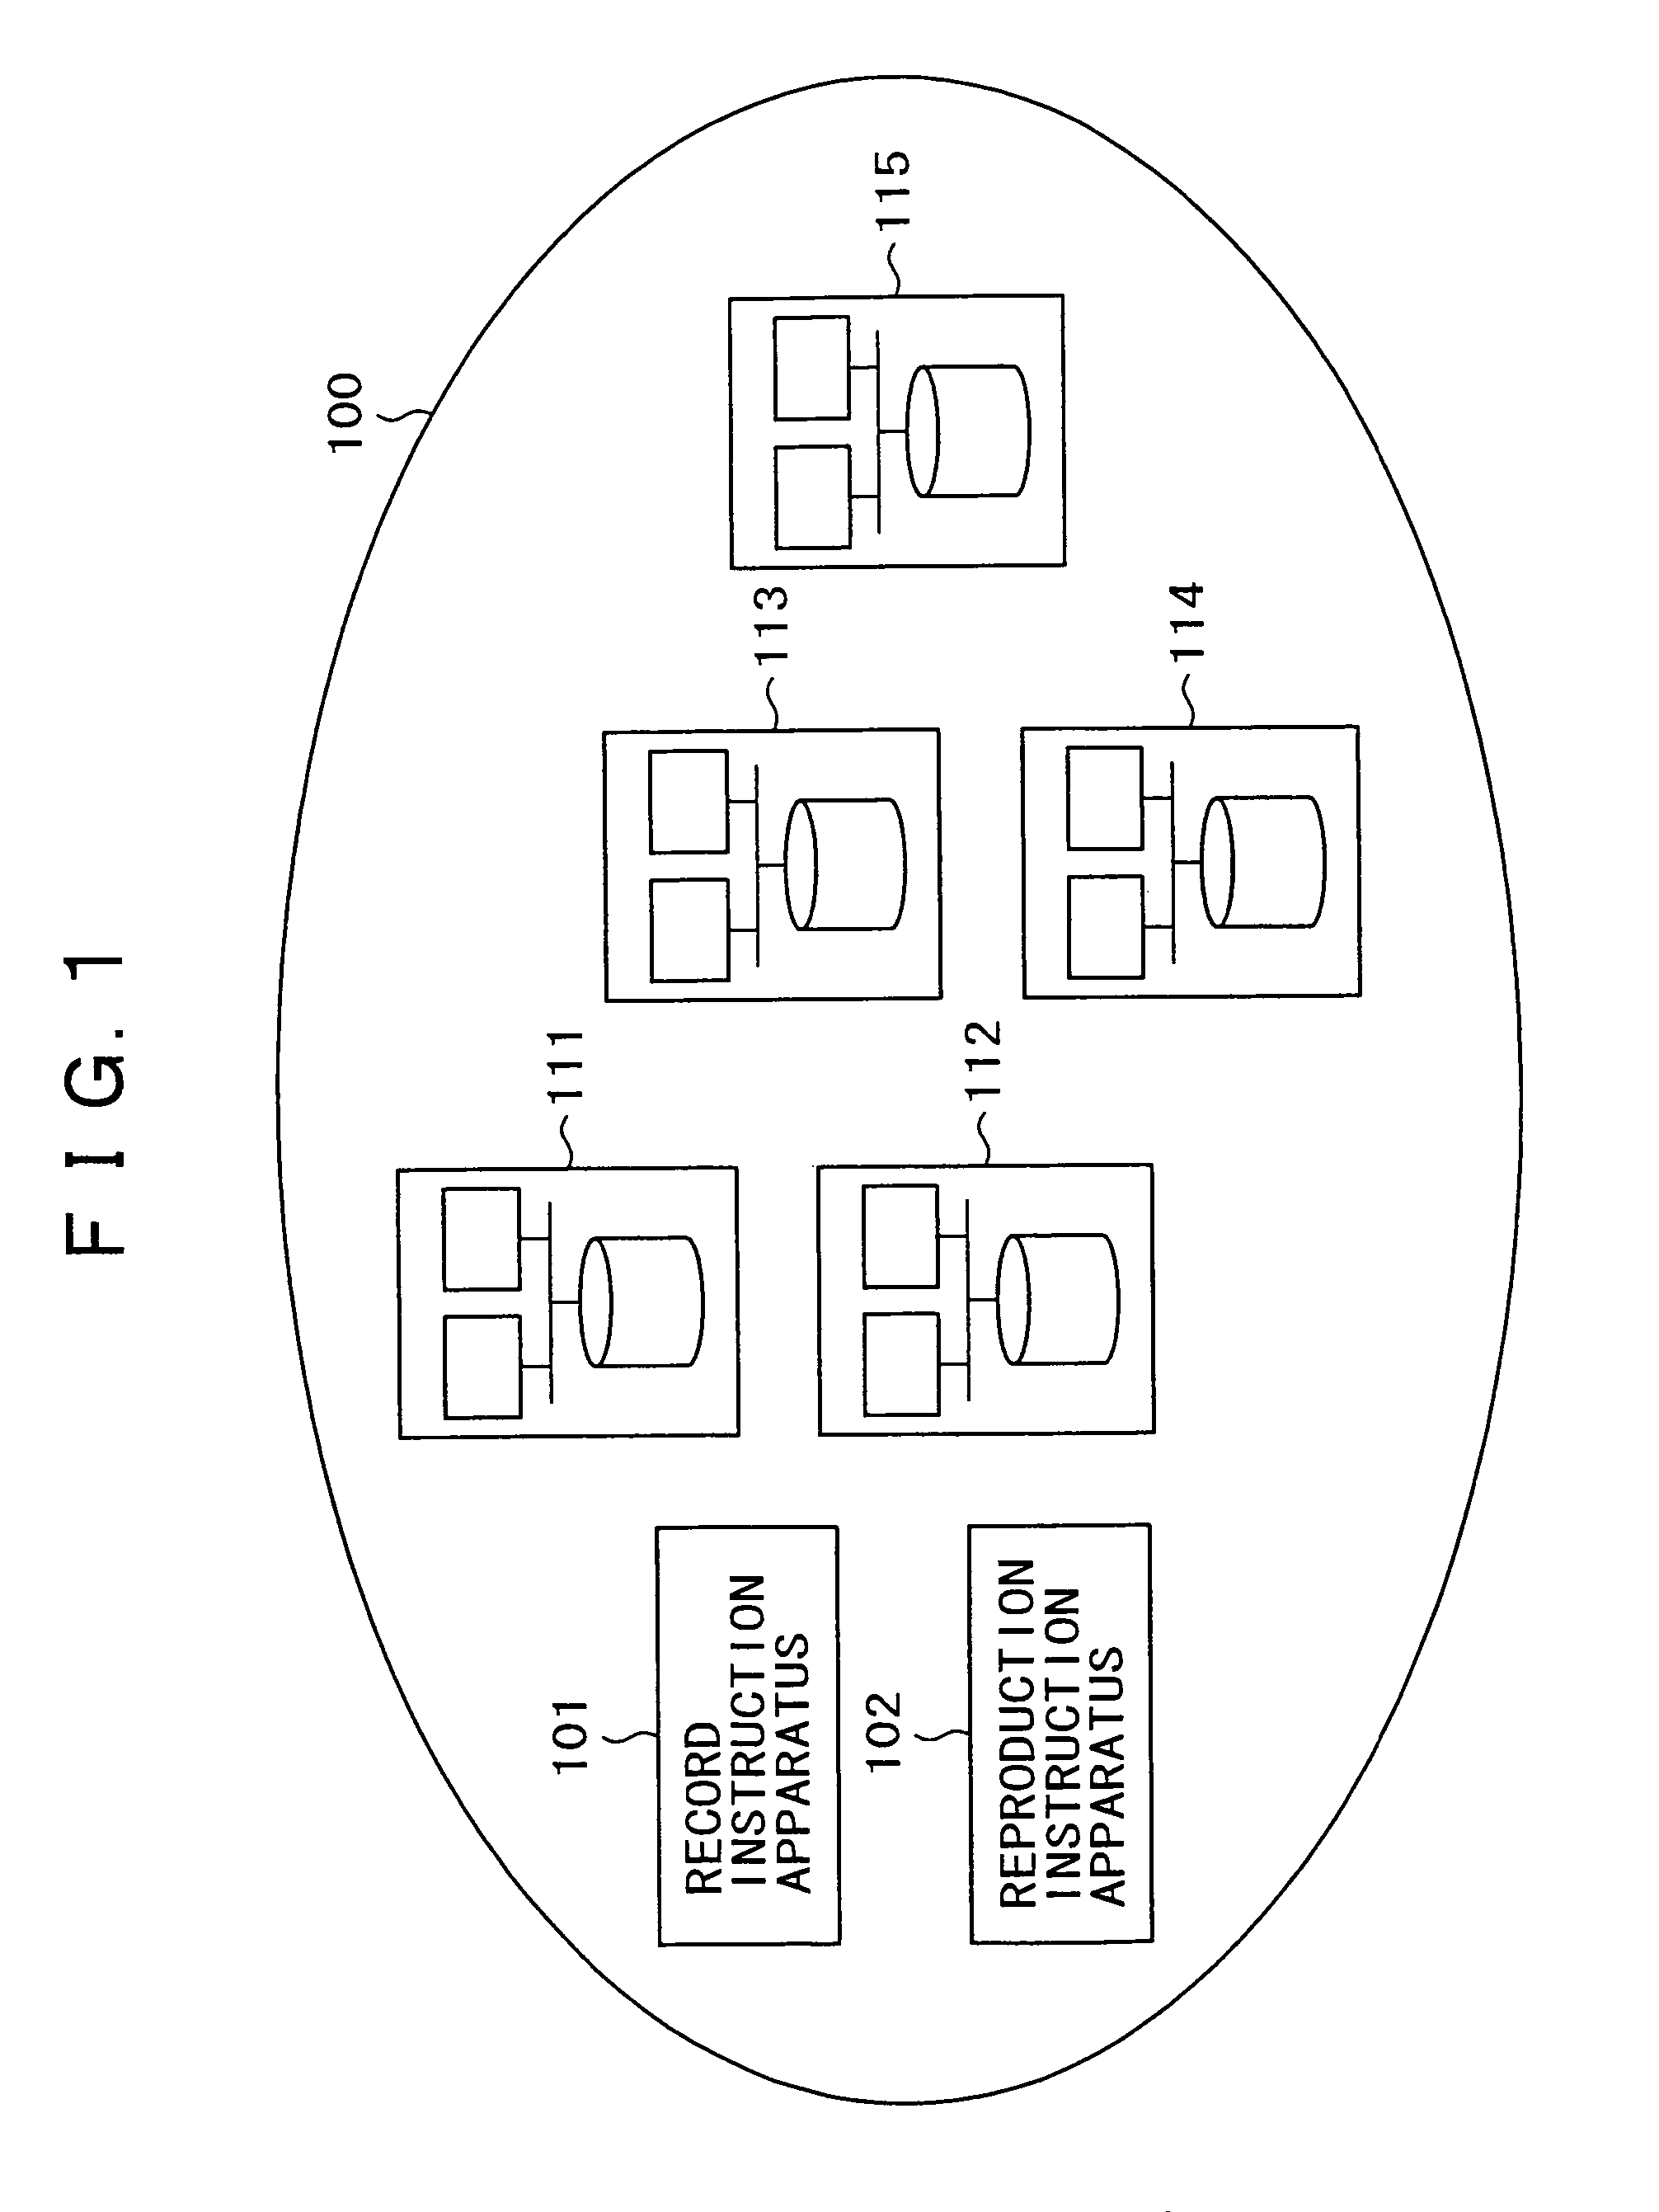 Controlling data transmission on a data storage network by selecting from multiple transmission modes